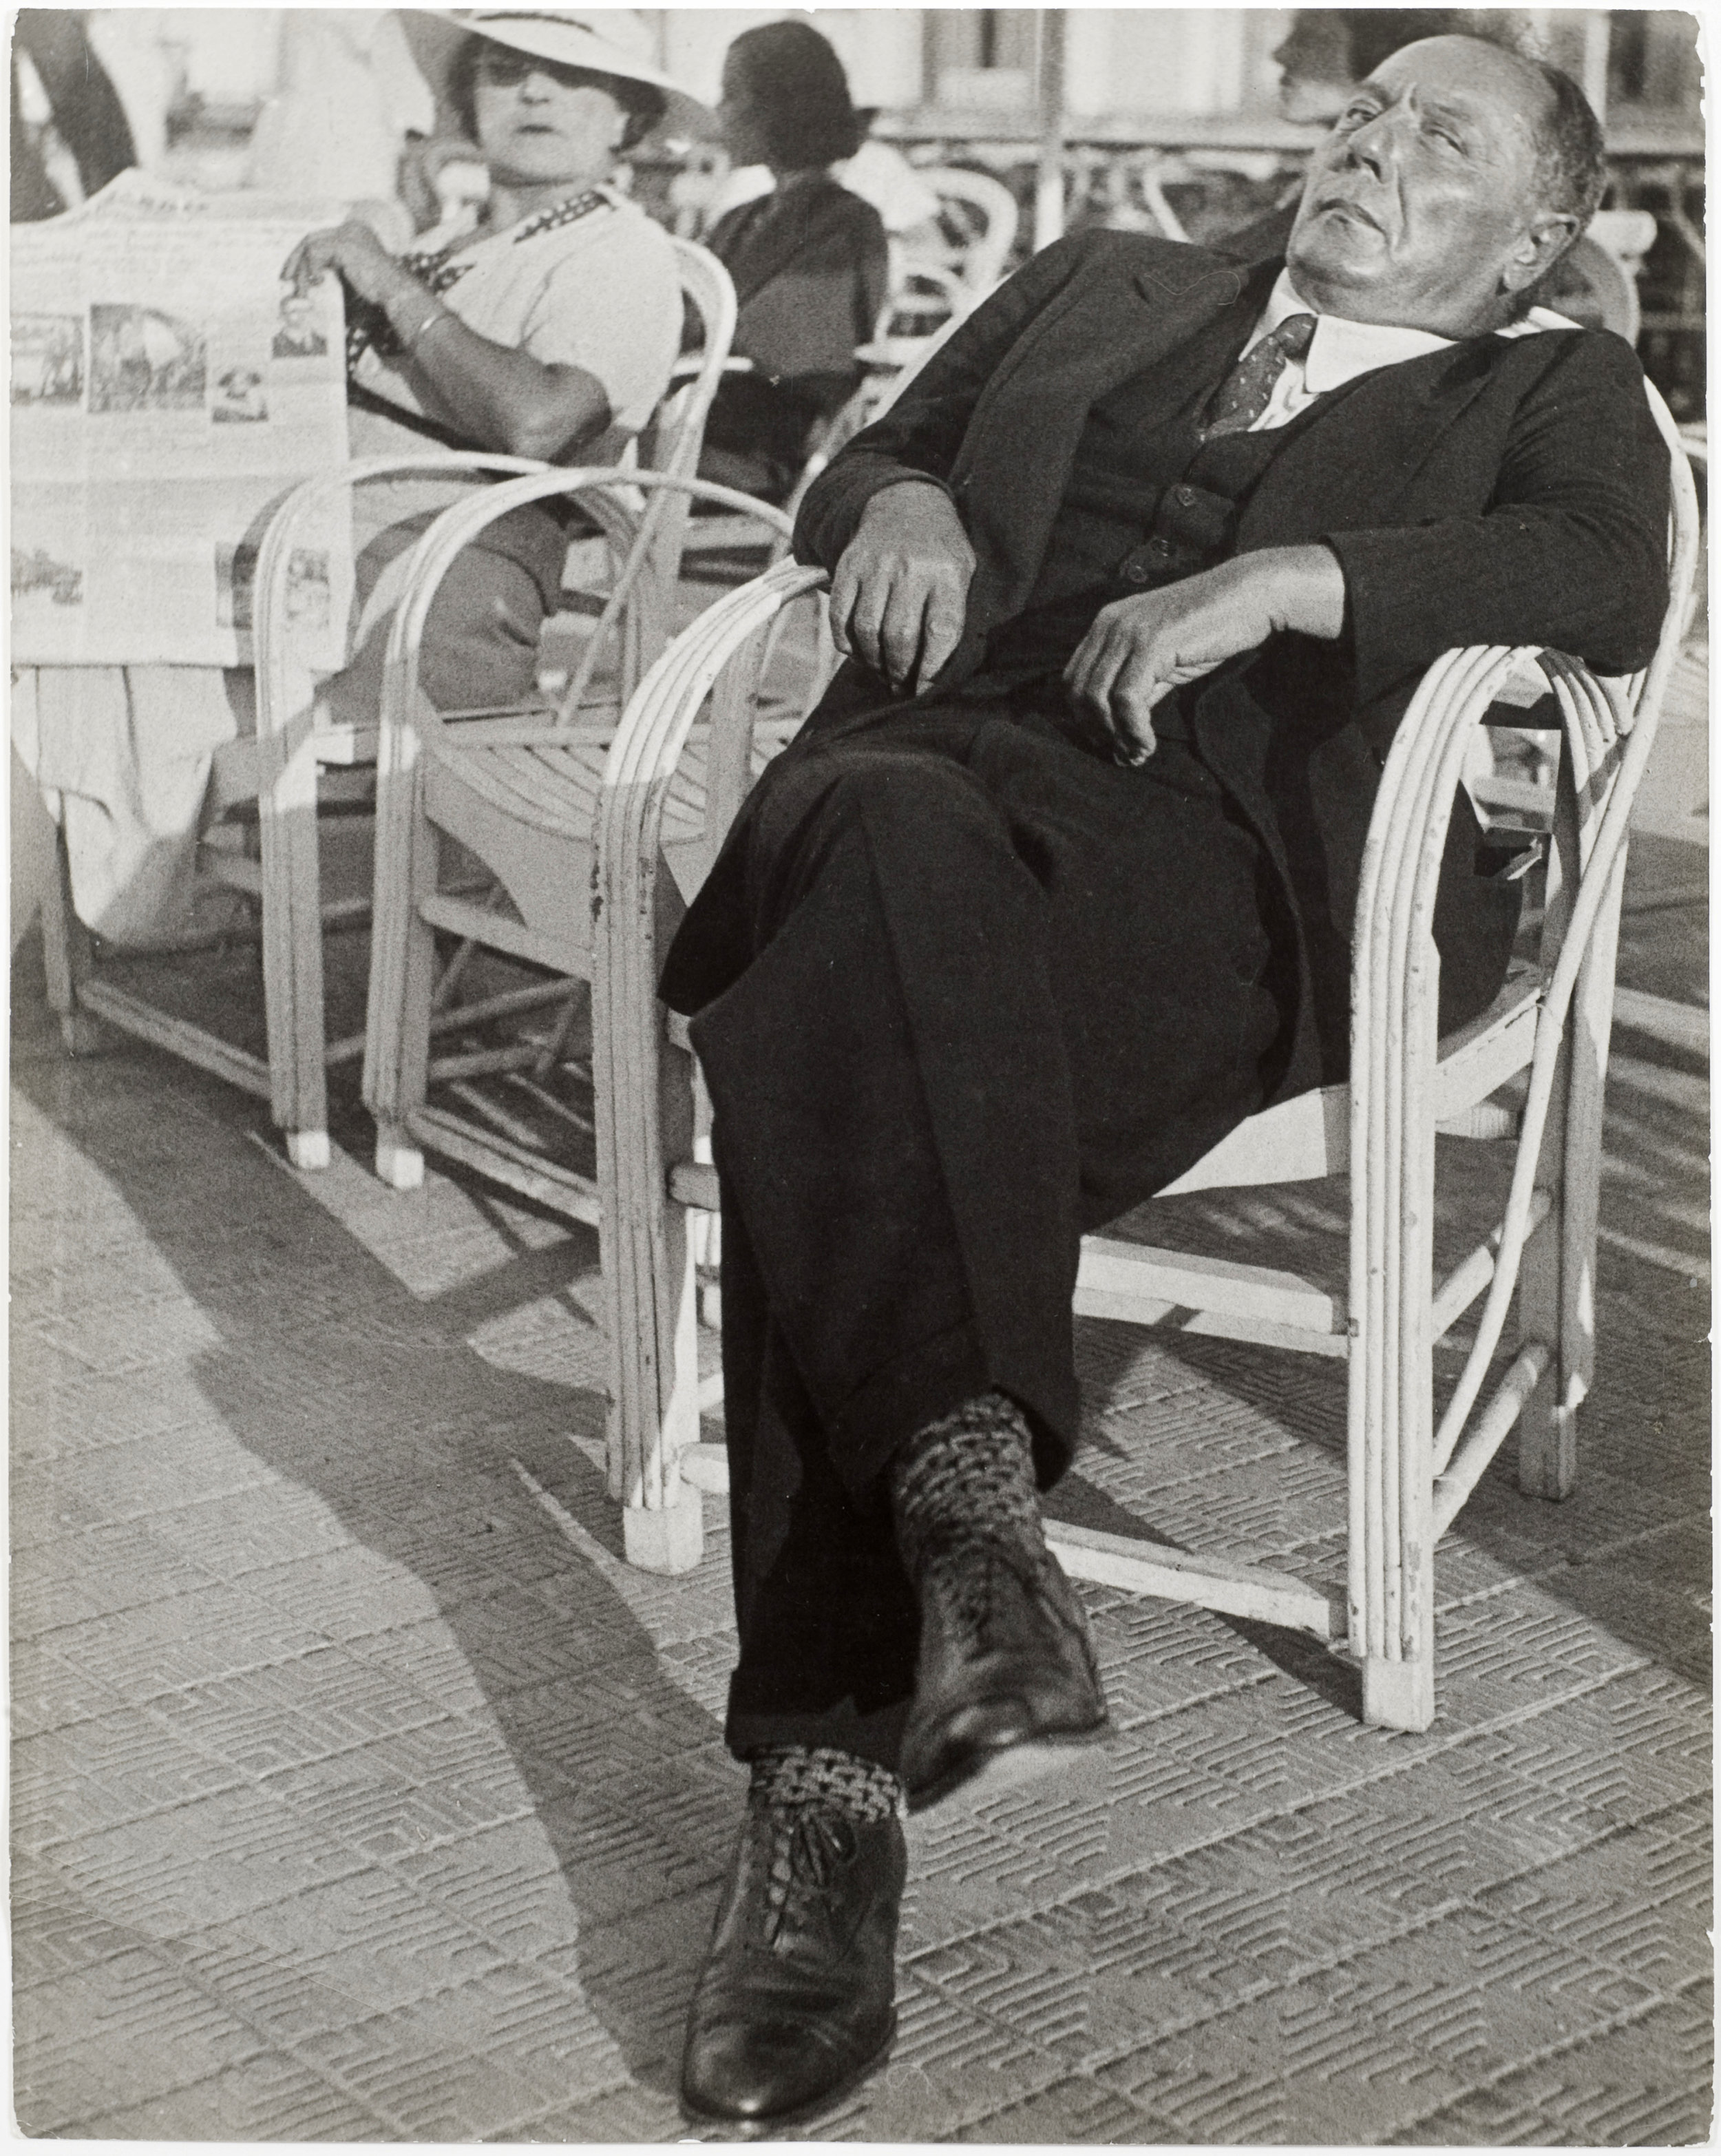 The Gambler, French Riviera, 1937